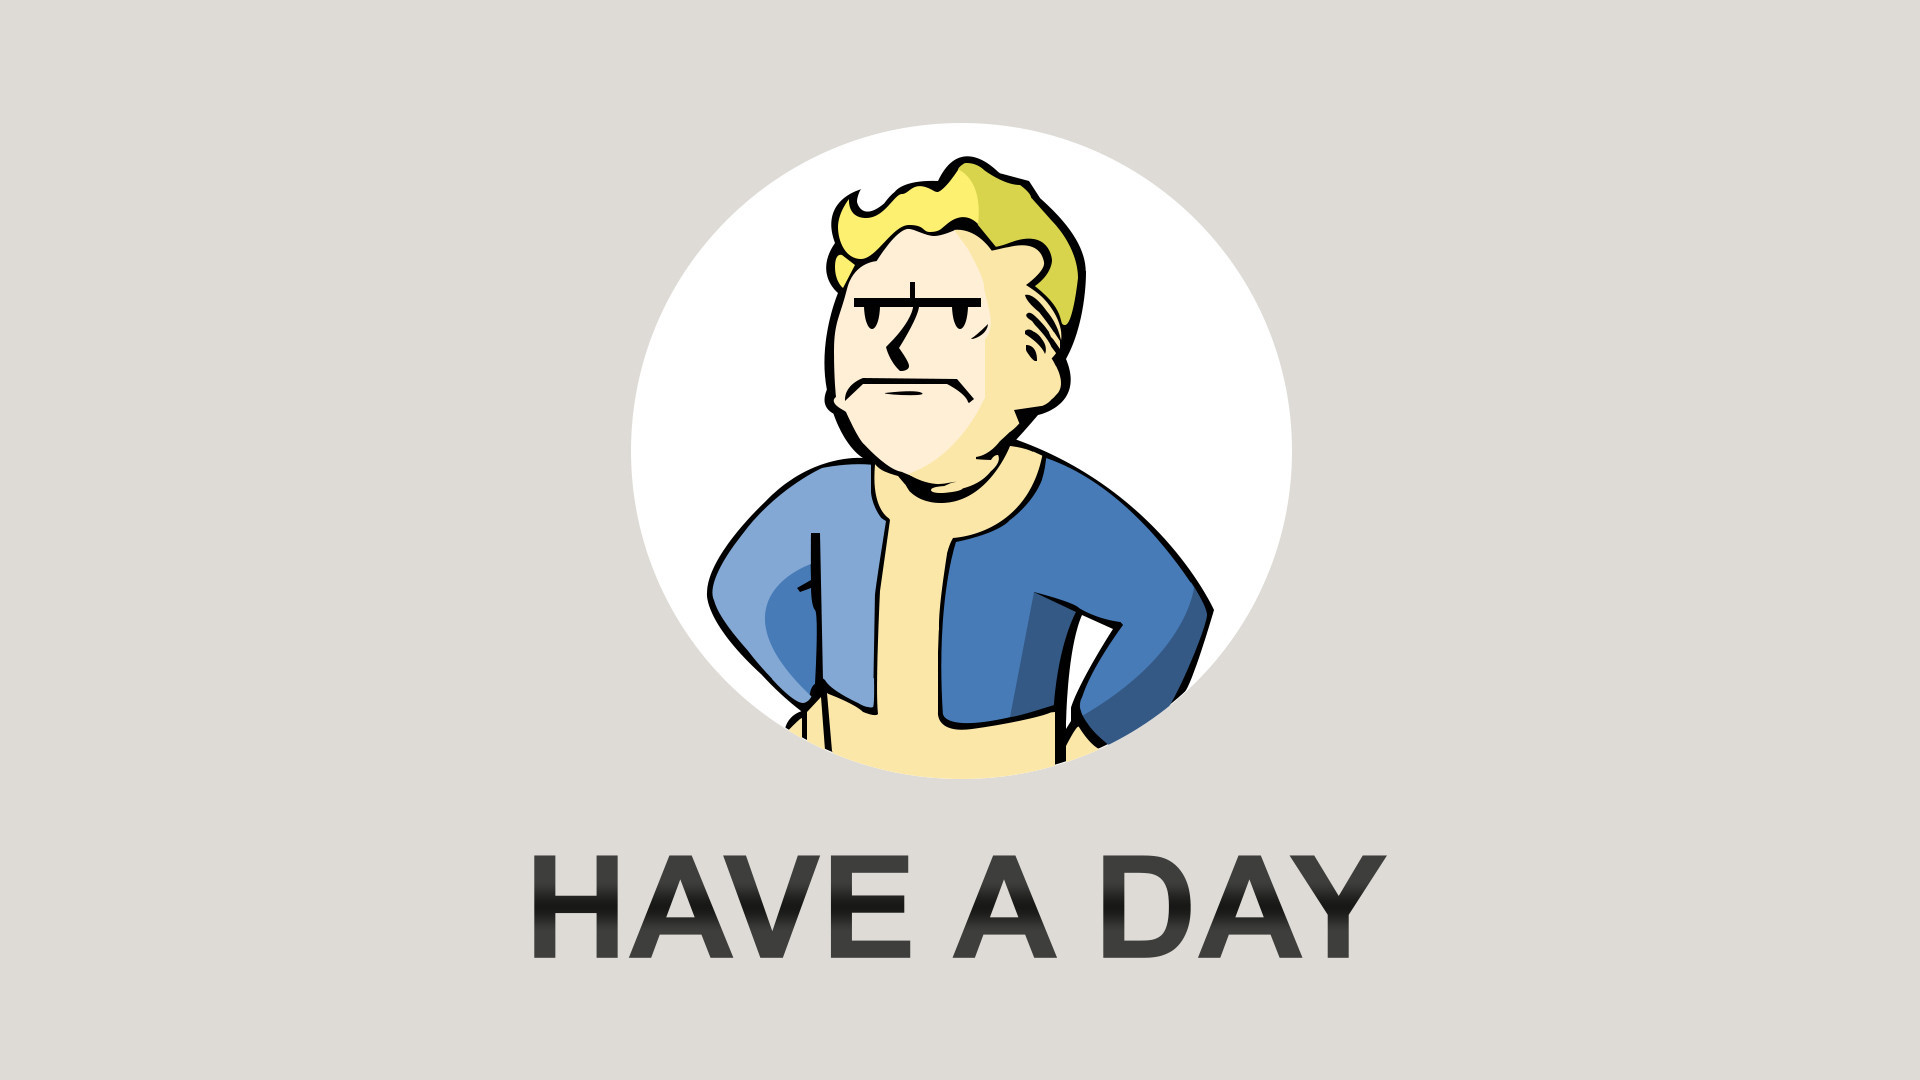 1920x1080 Inspired by my previous wallpaper, the Vault Boy [1920 x 1080] [x-post  /r/gaming] ...